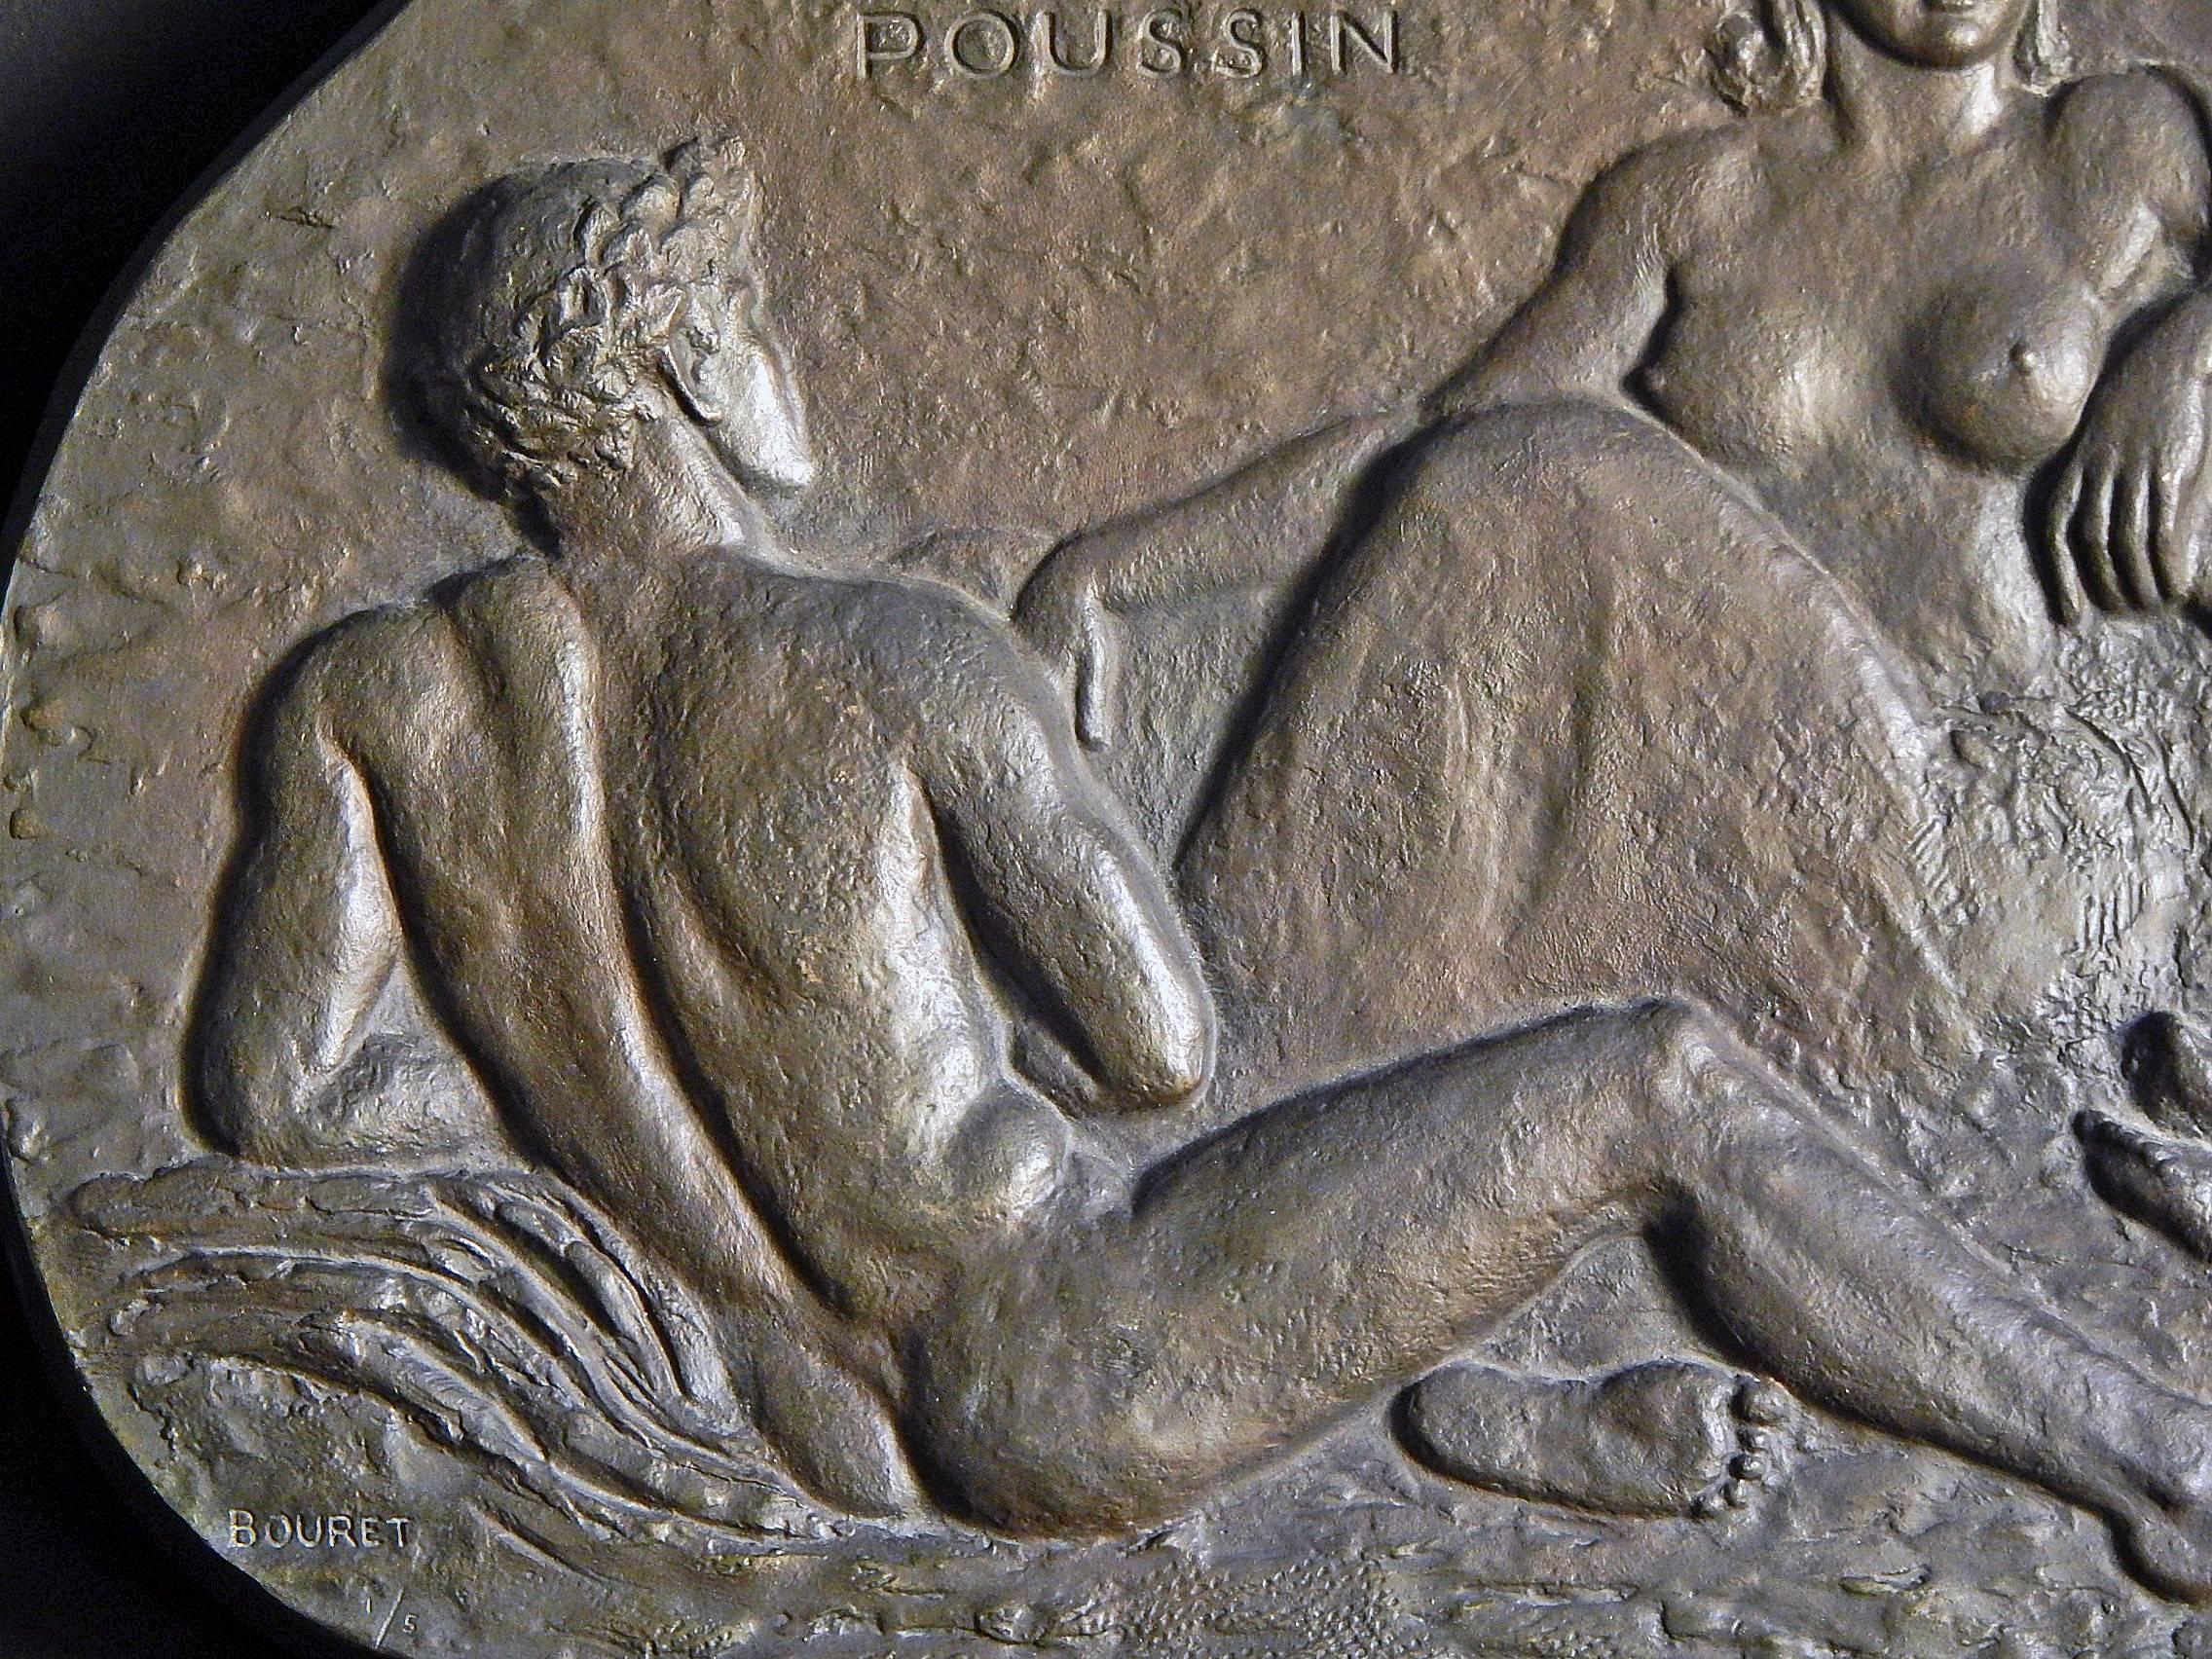 A rare and gorgeous bronze panel, this bas relief sculpture was created by Pierre Bouret in honor of Nicolas Poussin. It's multiple male and female nudes in a bucolic setting are clearly inspired by some of Poussin's Arcadian paintings, such as The